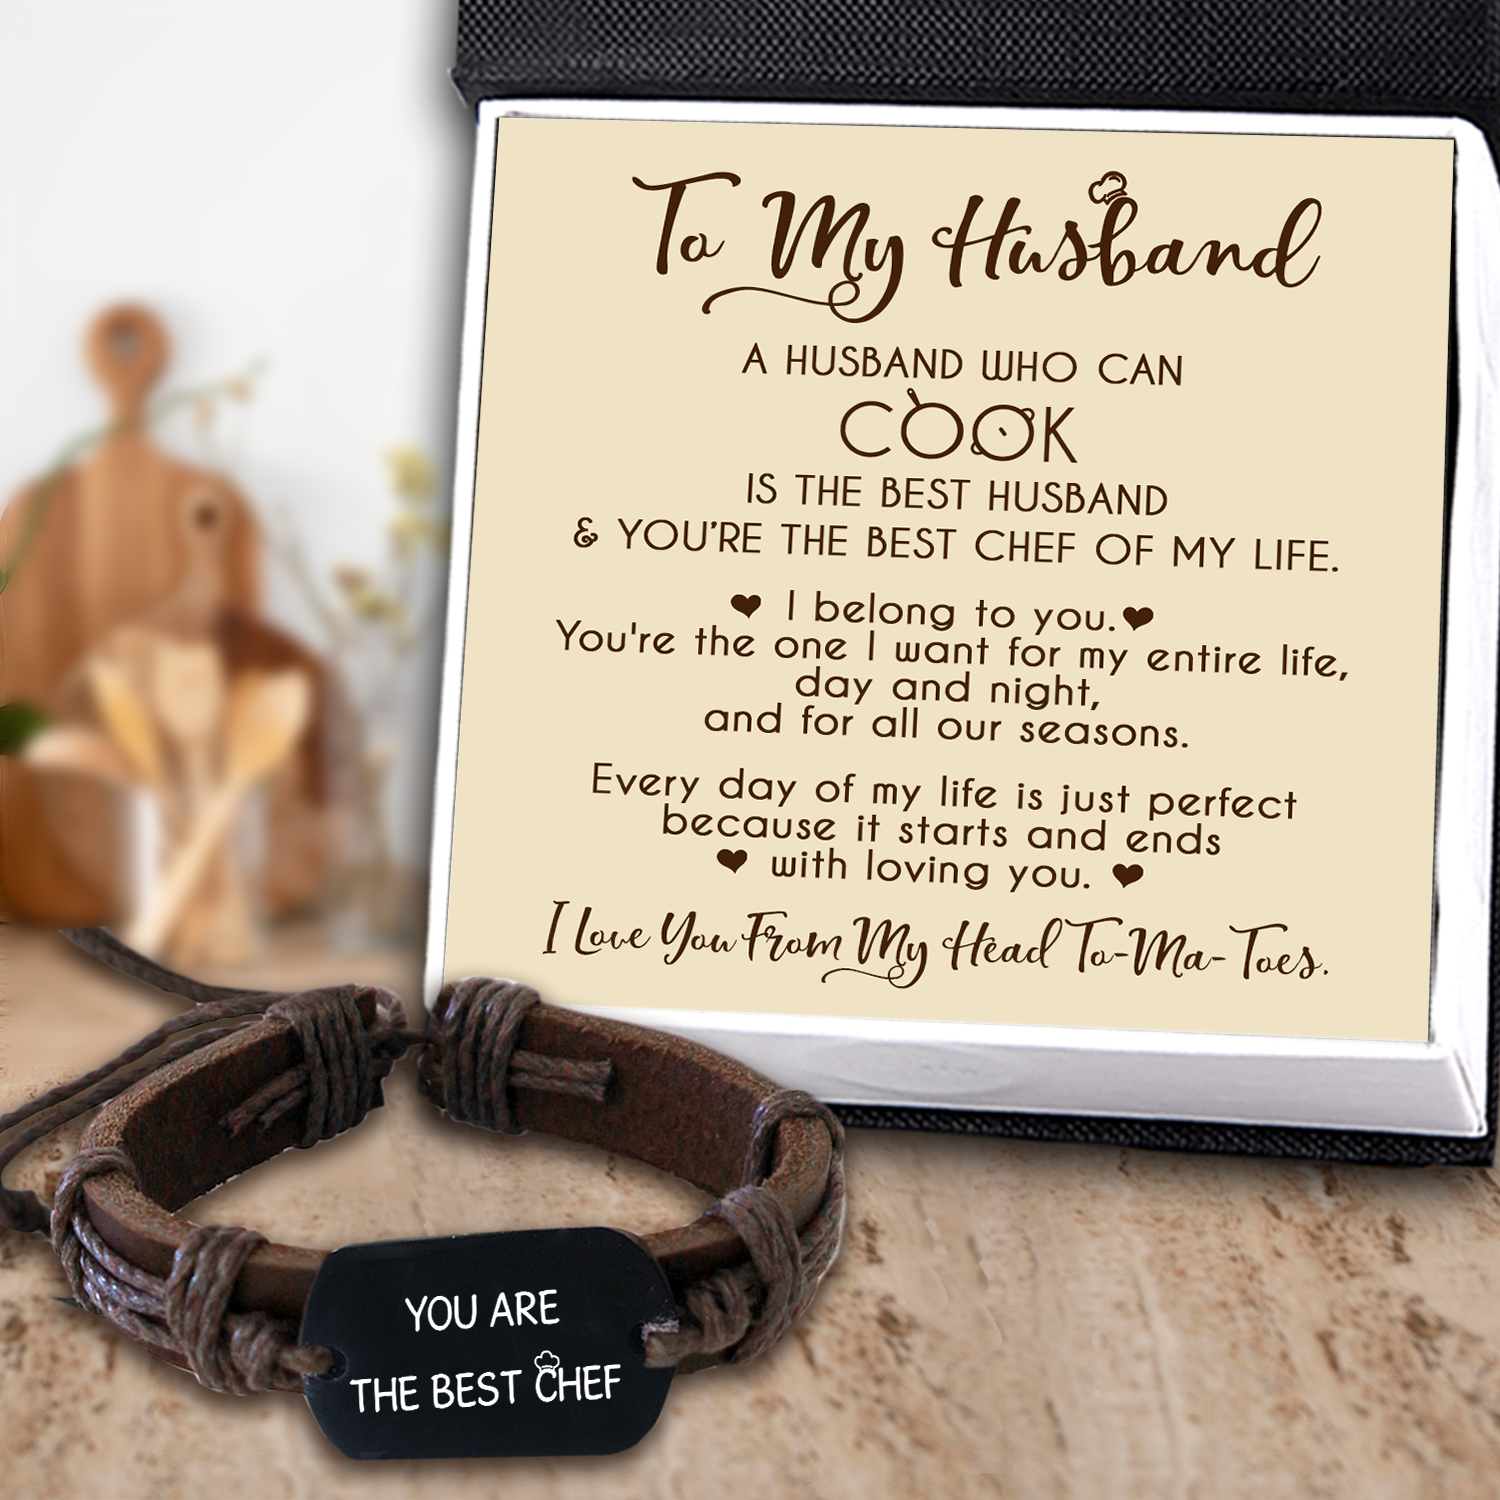 Leather Cord Bracelet - Cooking - To My Husband - I Belong To You - Ukgbr14003